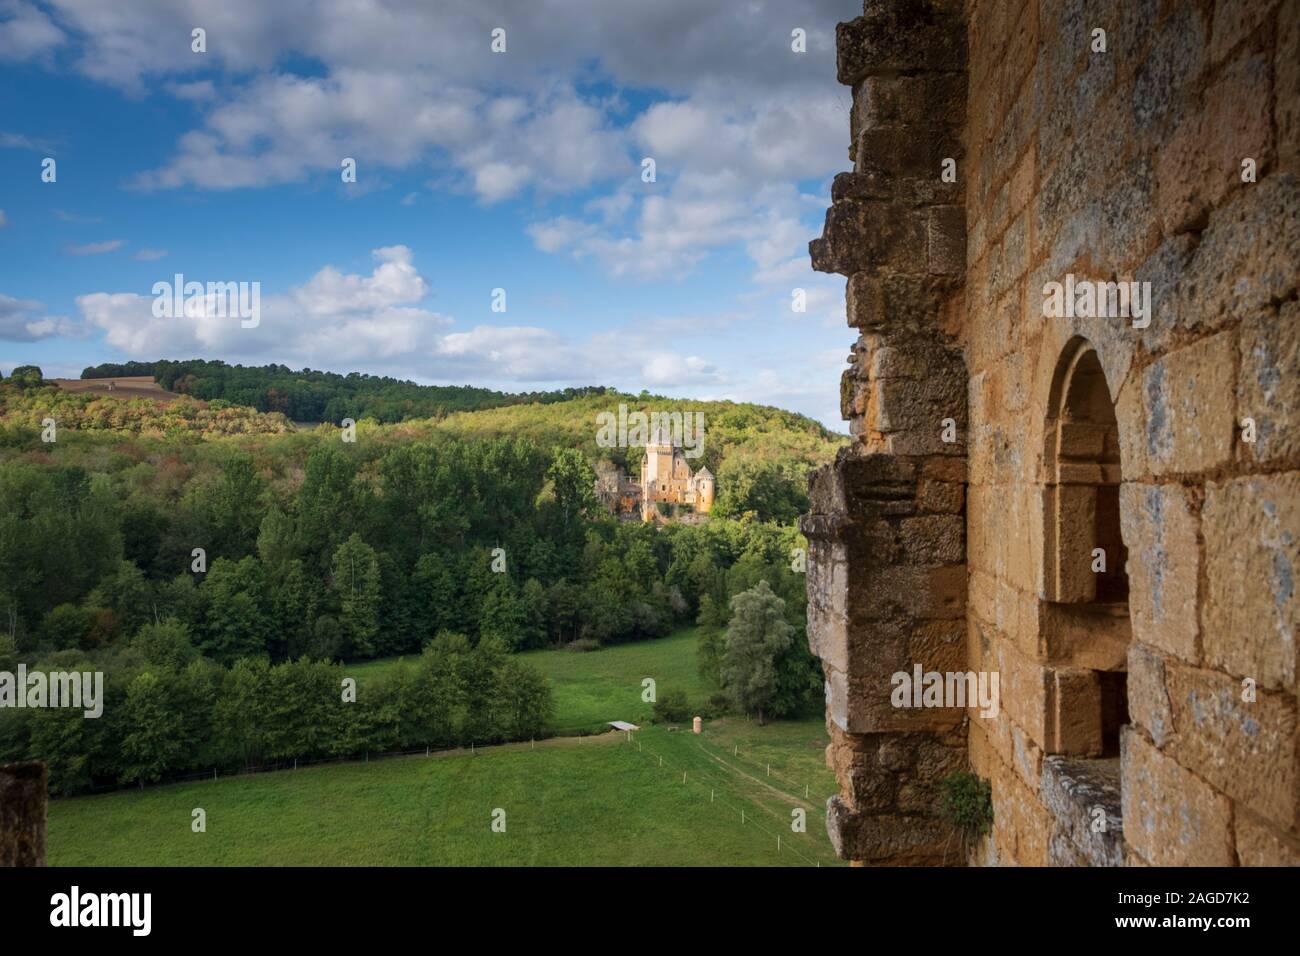 View of Chateau De Laussel from Château de Commarque, a ruined hillside castle located between Sarlat and Les Eyzies, Dordogne, France Stock Photo